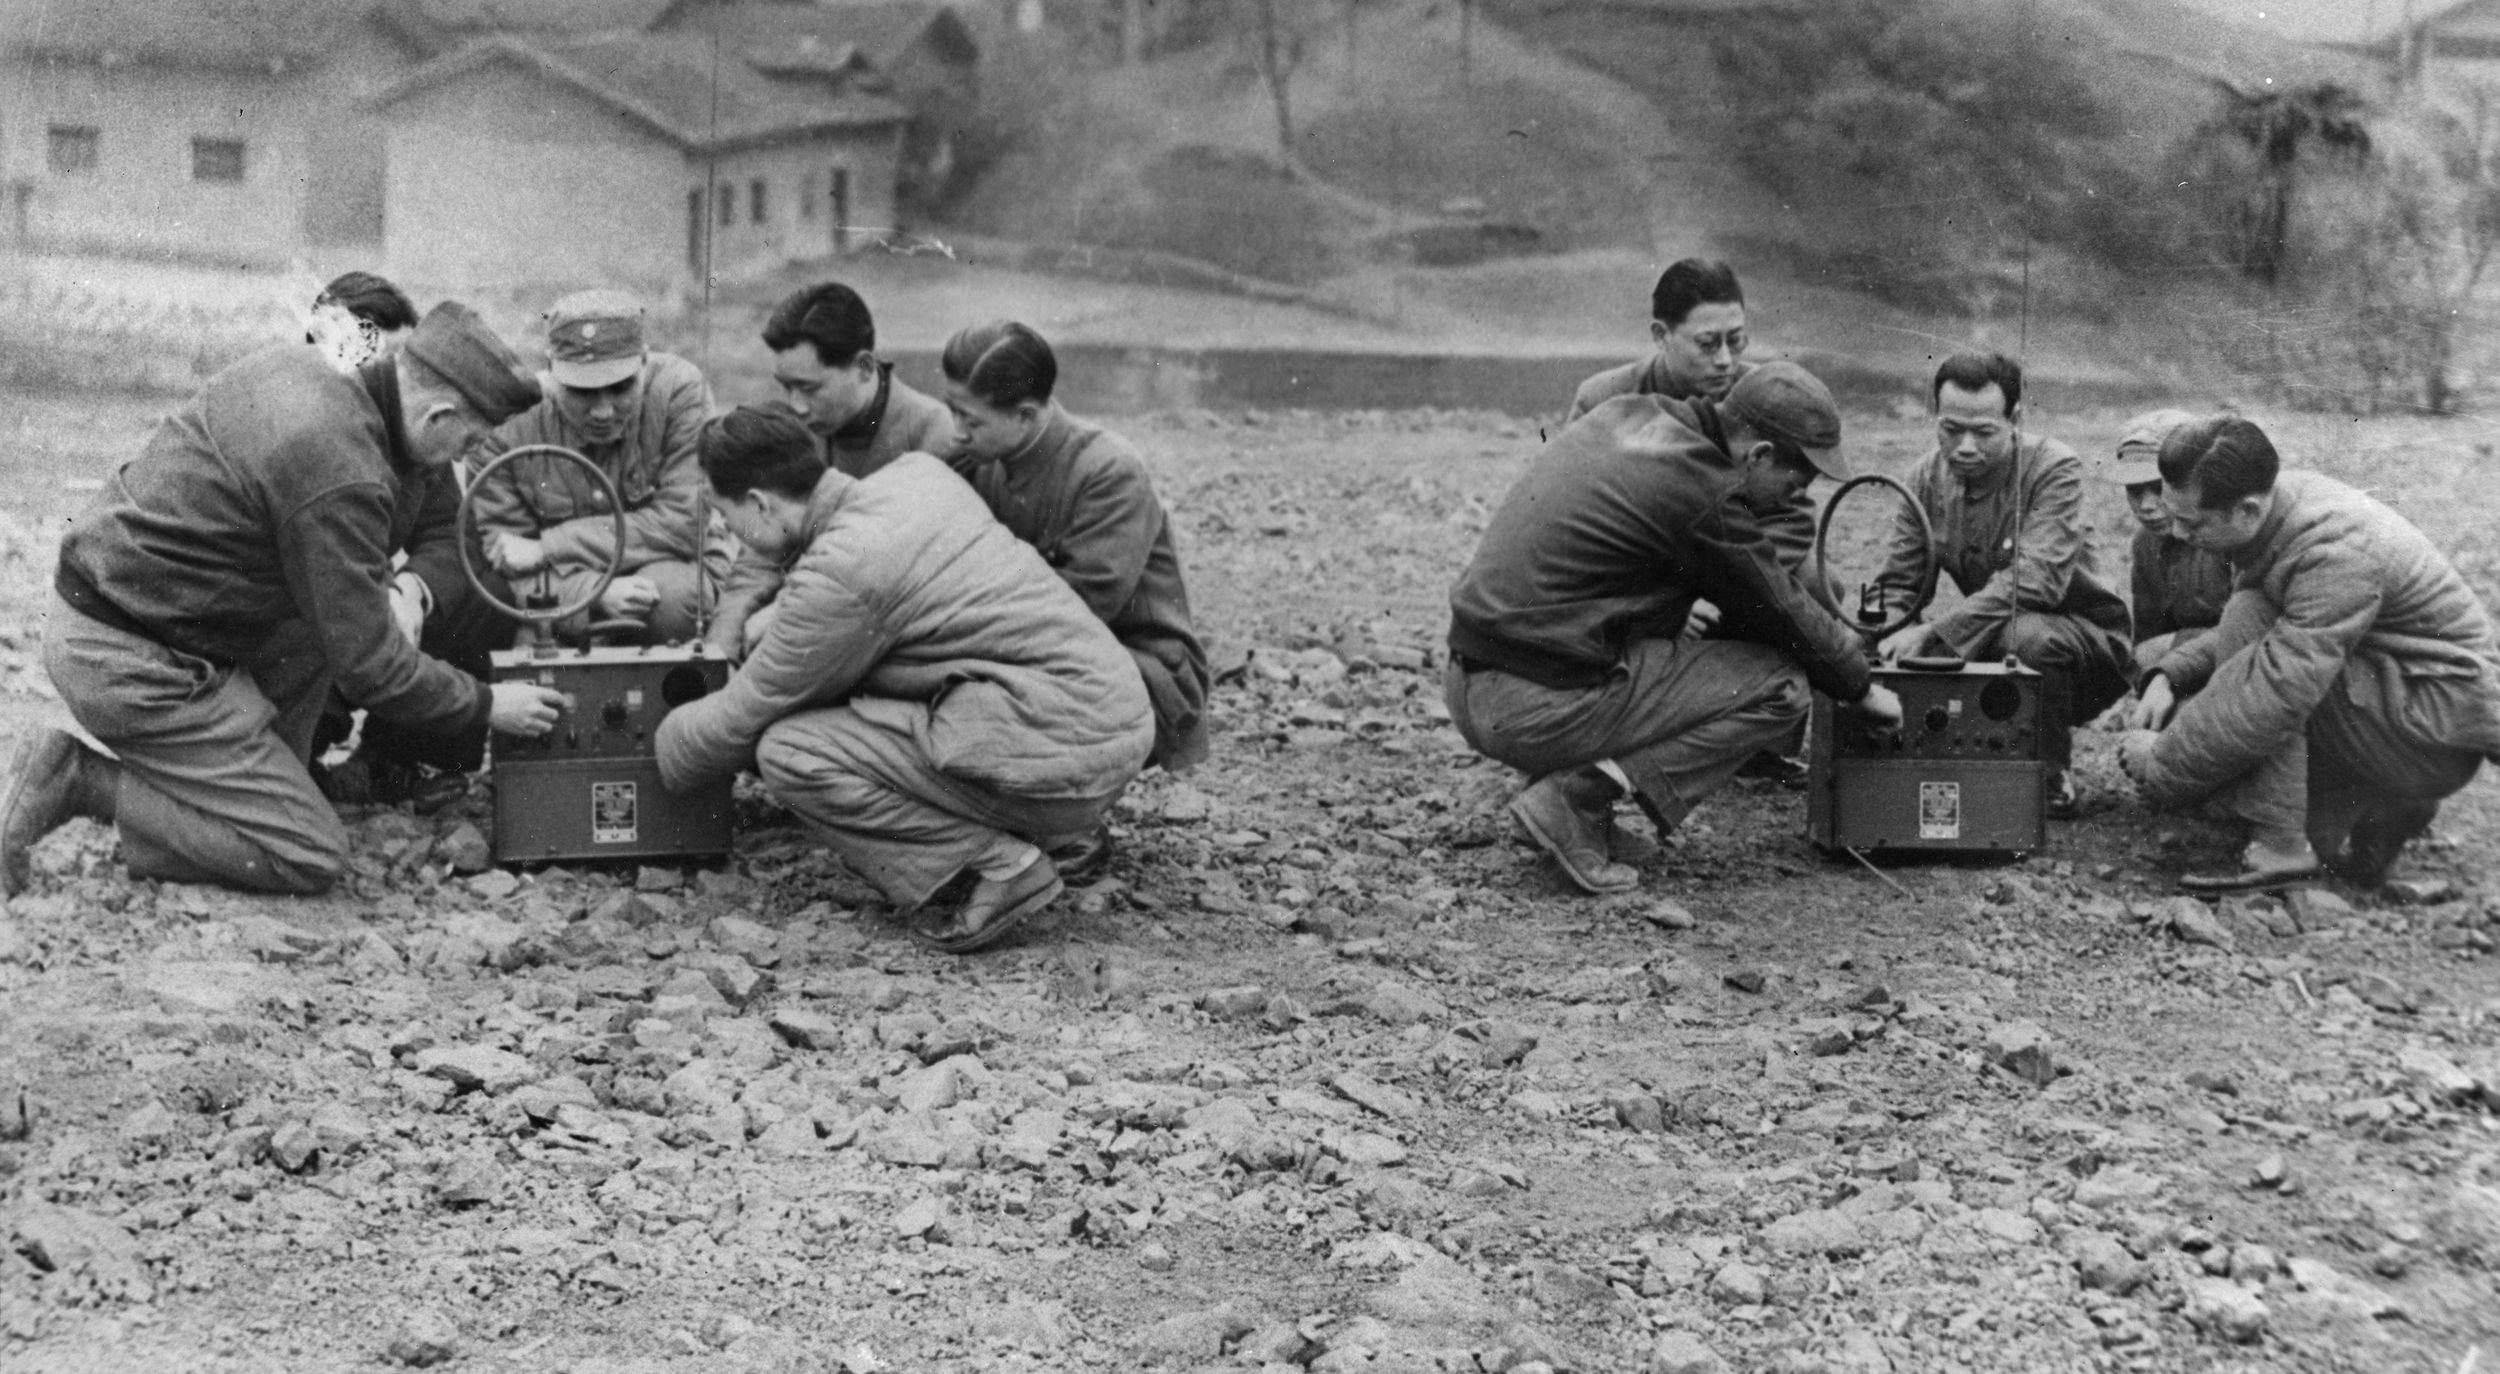 Chinese recruits receive instruction on radio use from Americans at Happy Valley.